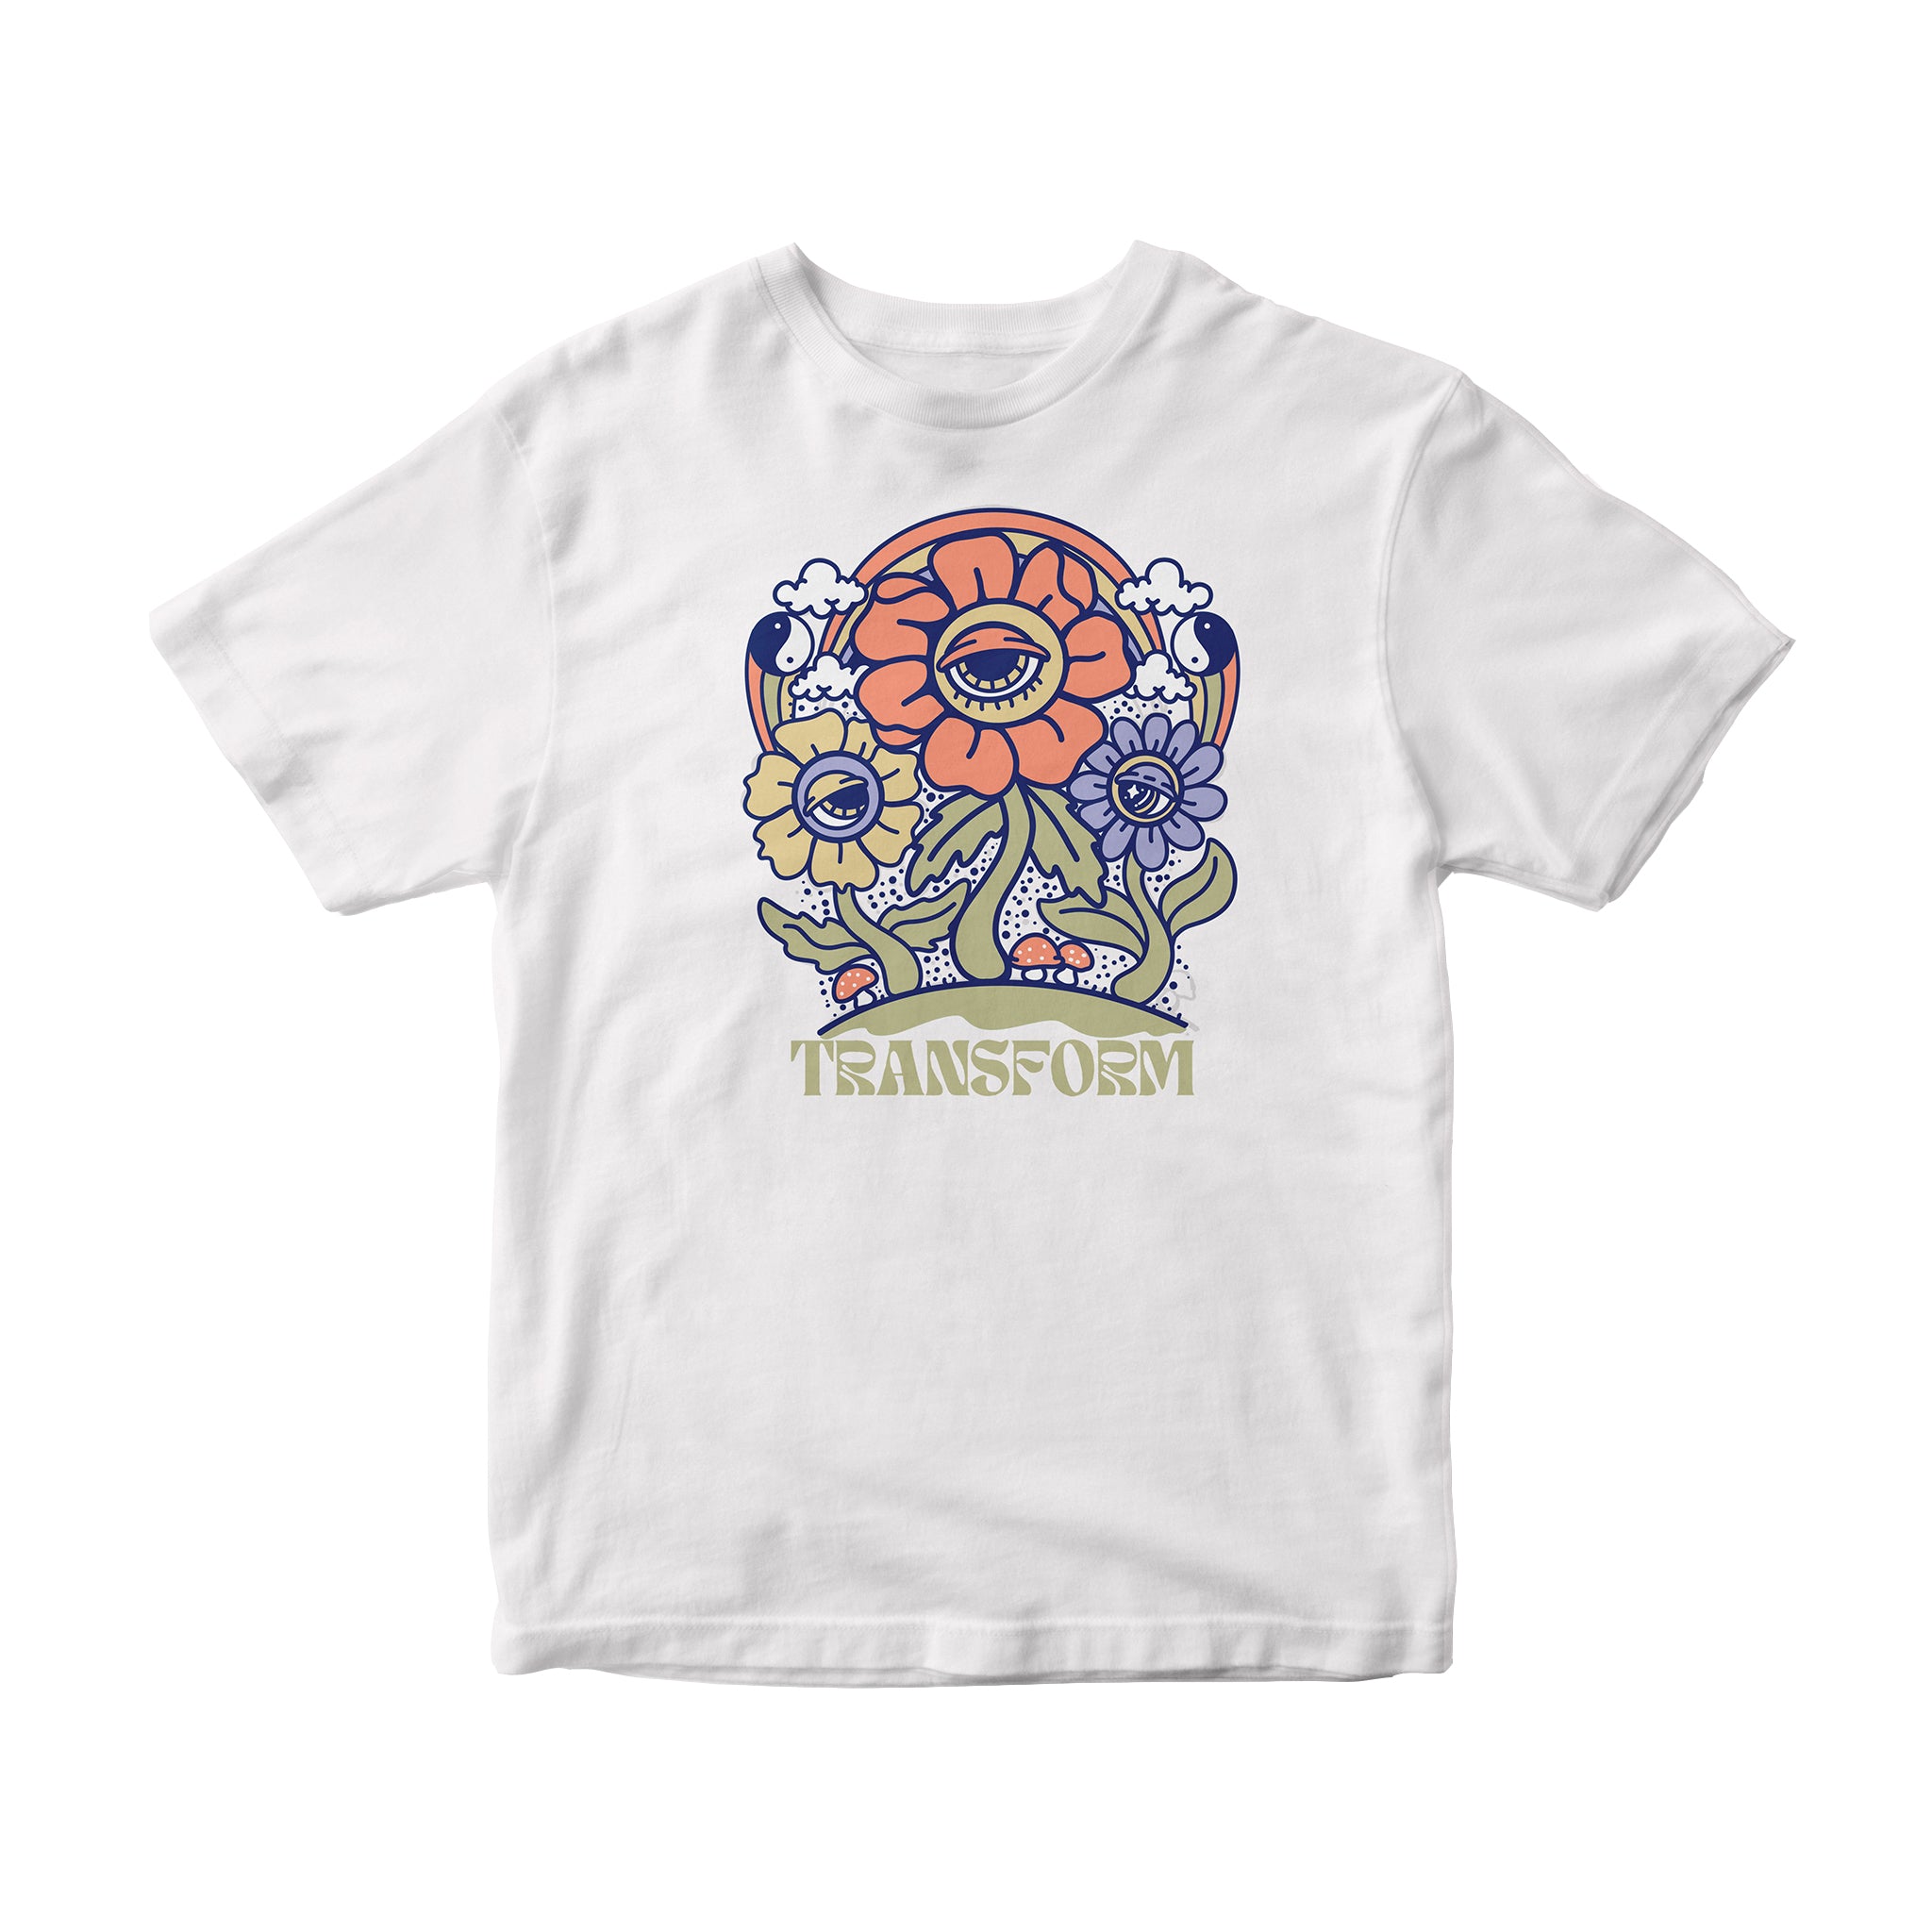 The Stoned Flower Tee White